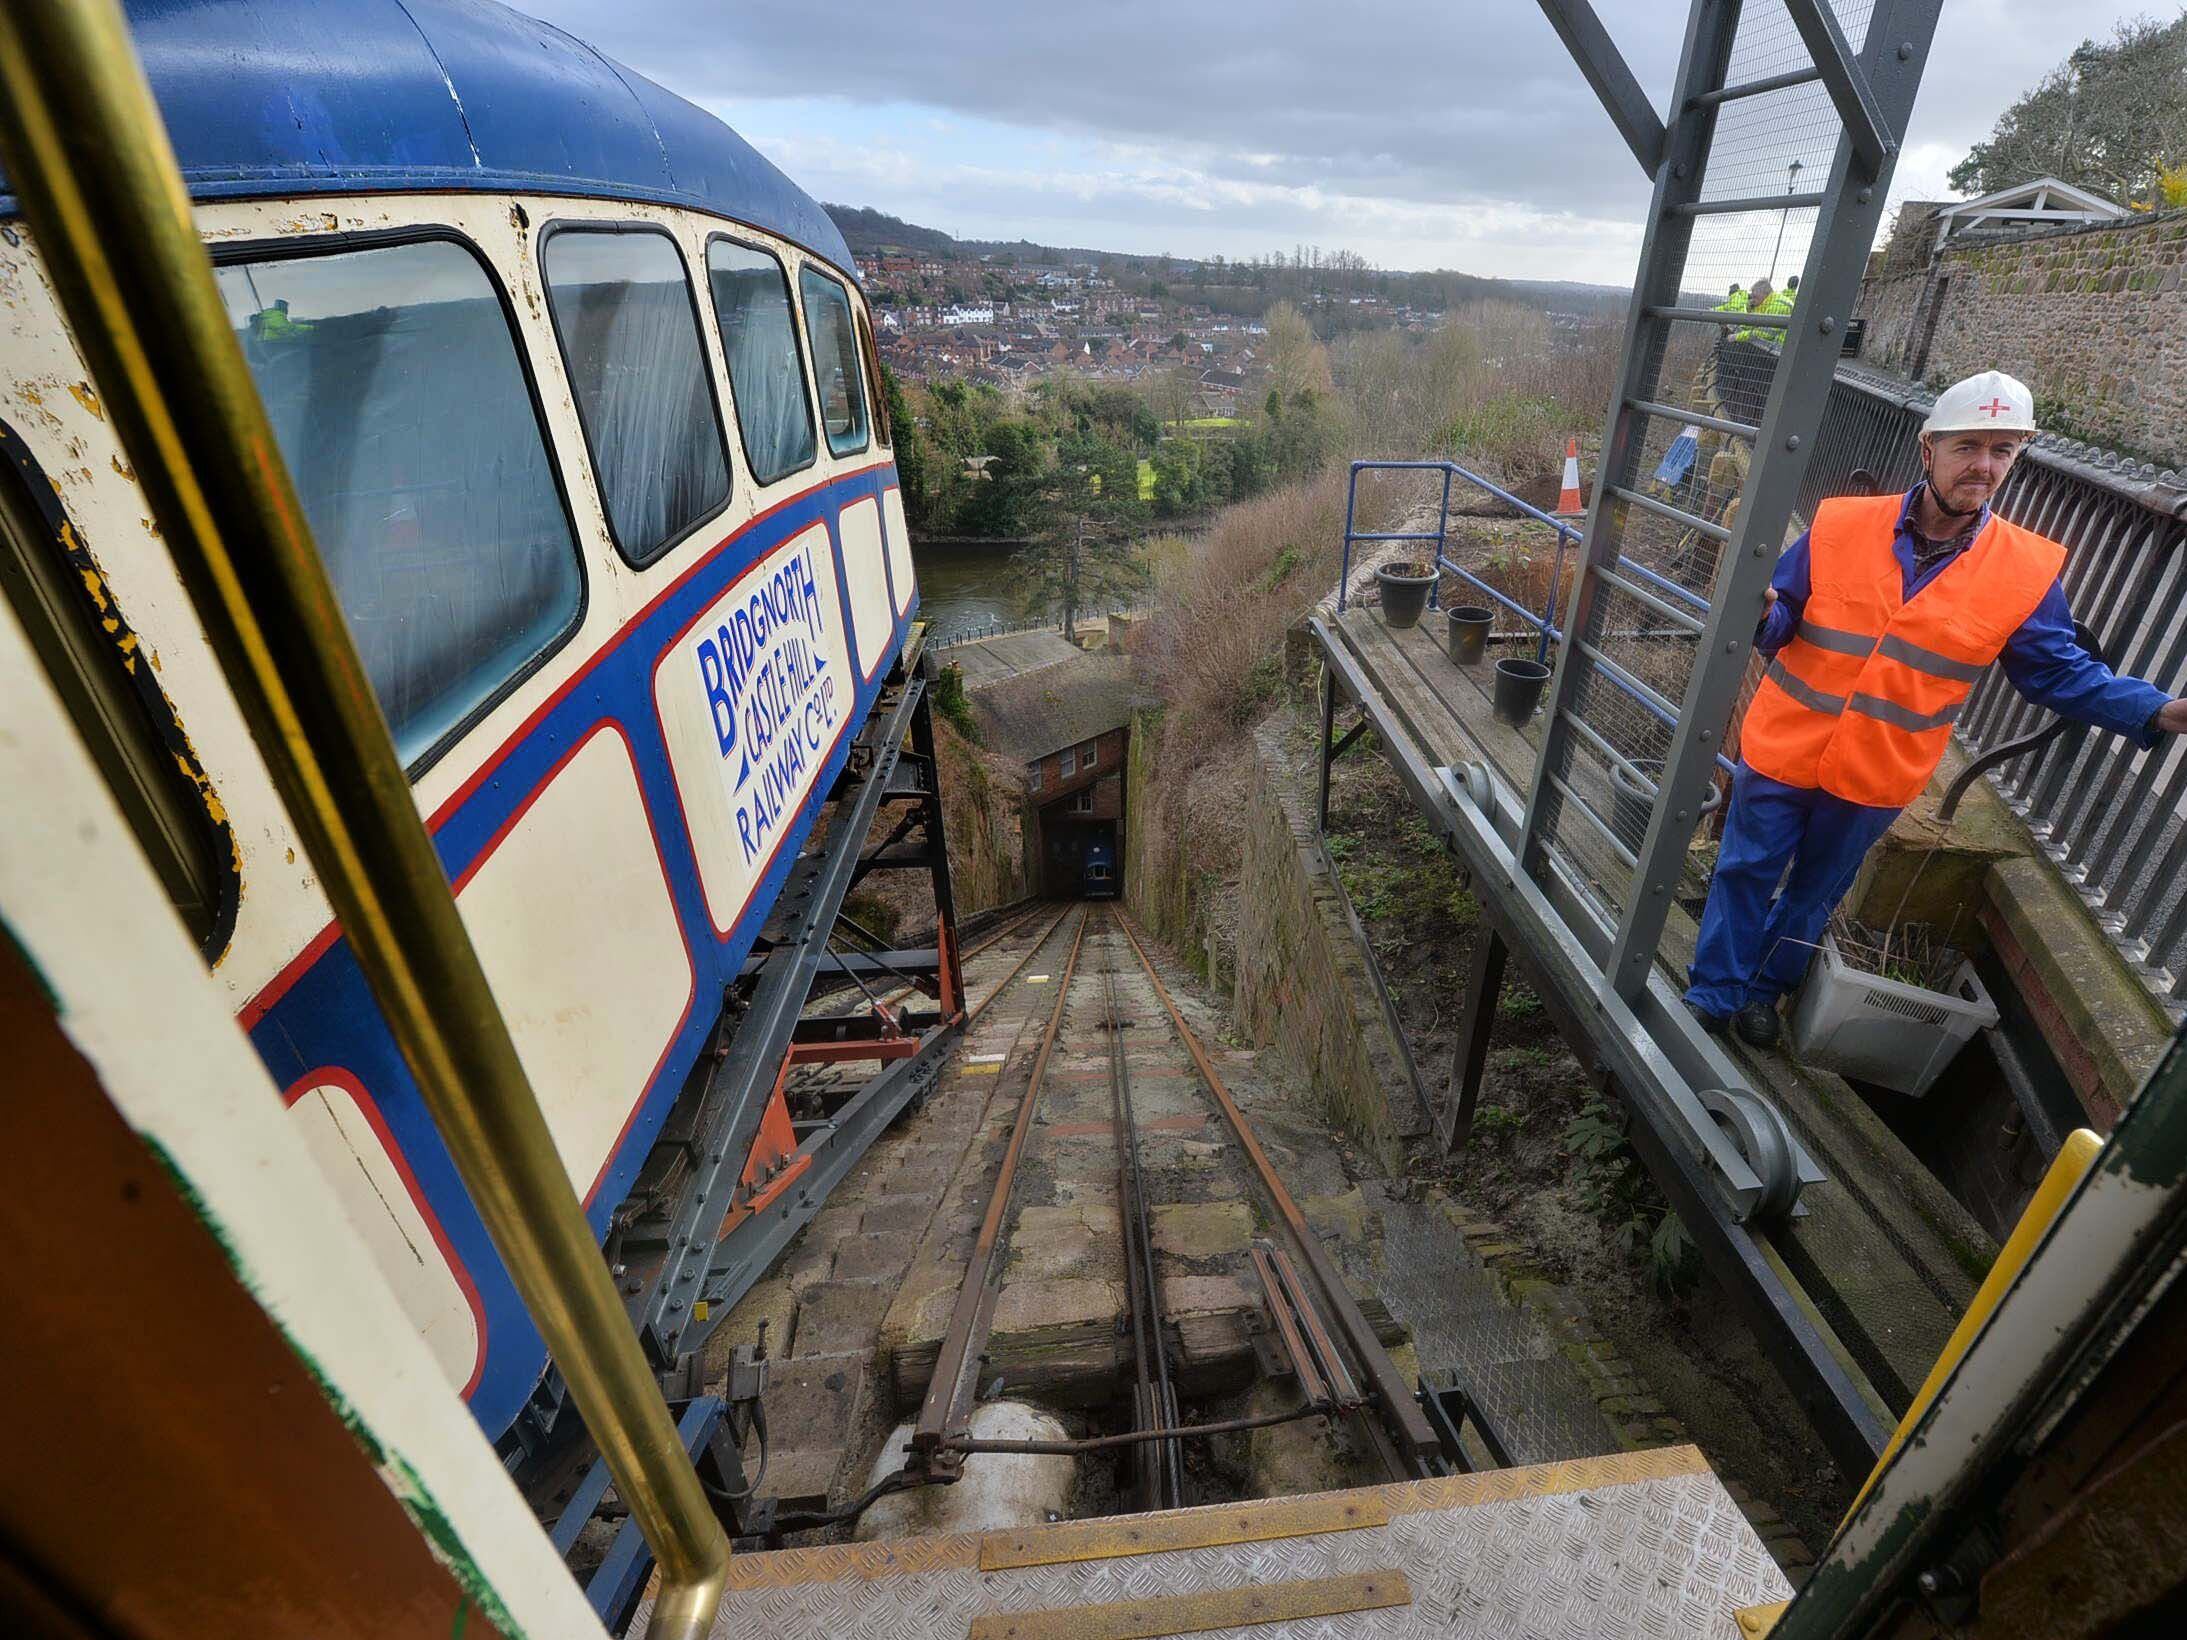 People of Bridgnorth stress importance of town's under-threat Cliff Railway